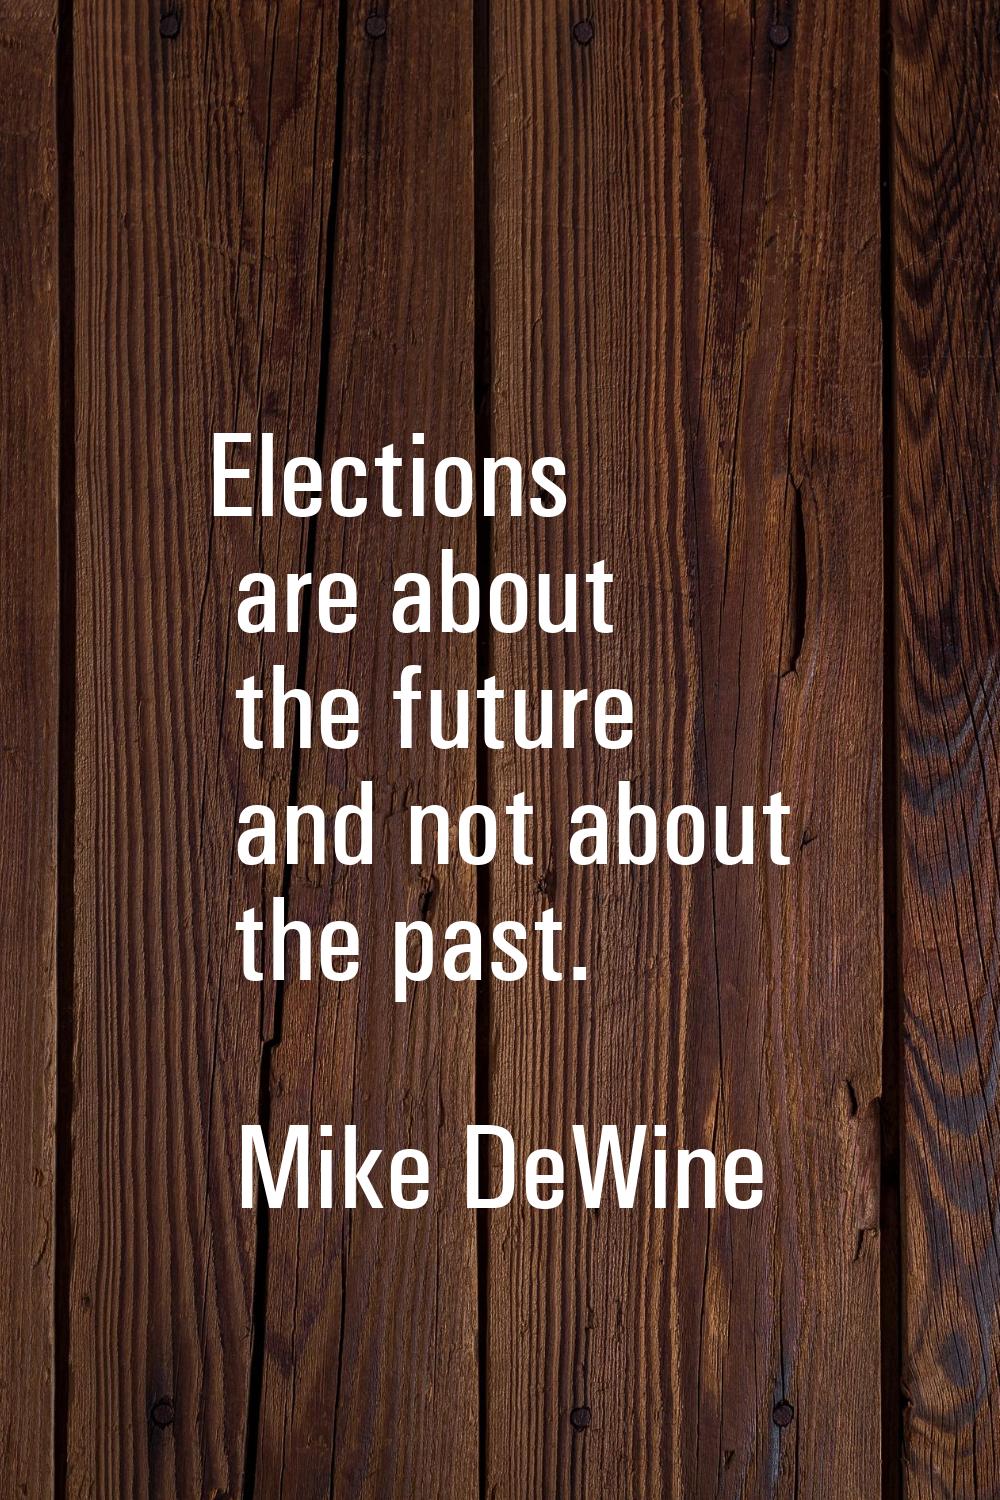 Elections are about the future and not about the past.